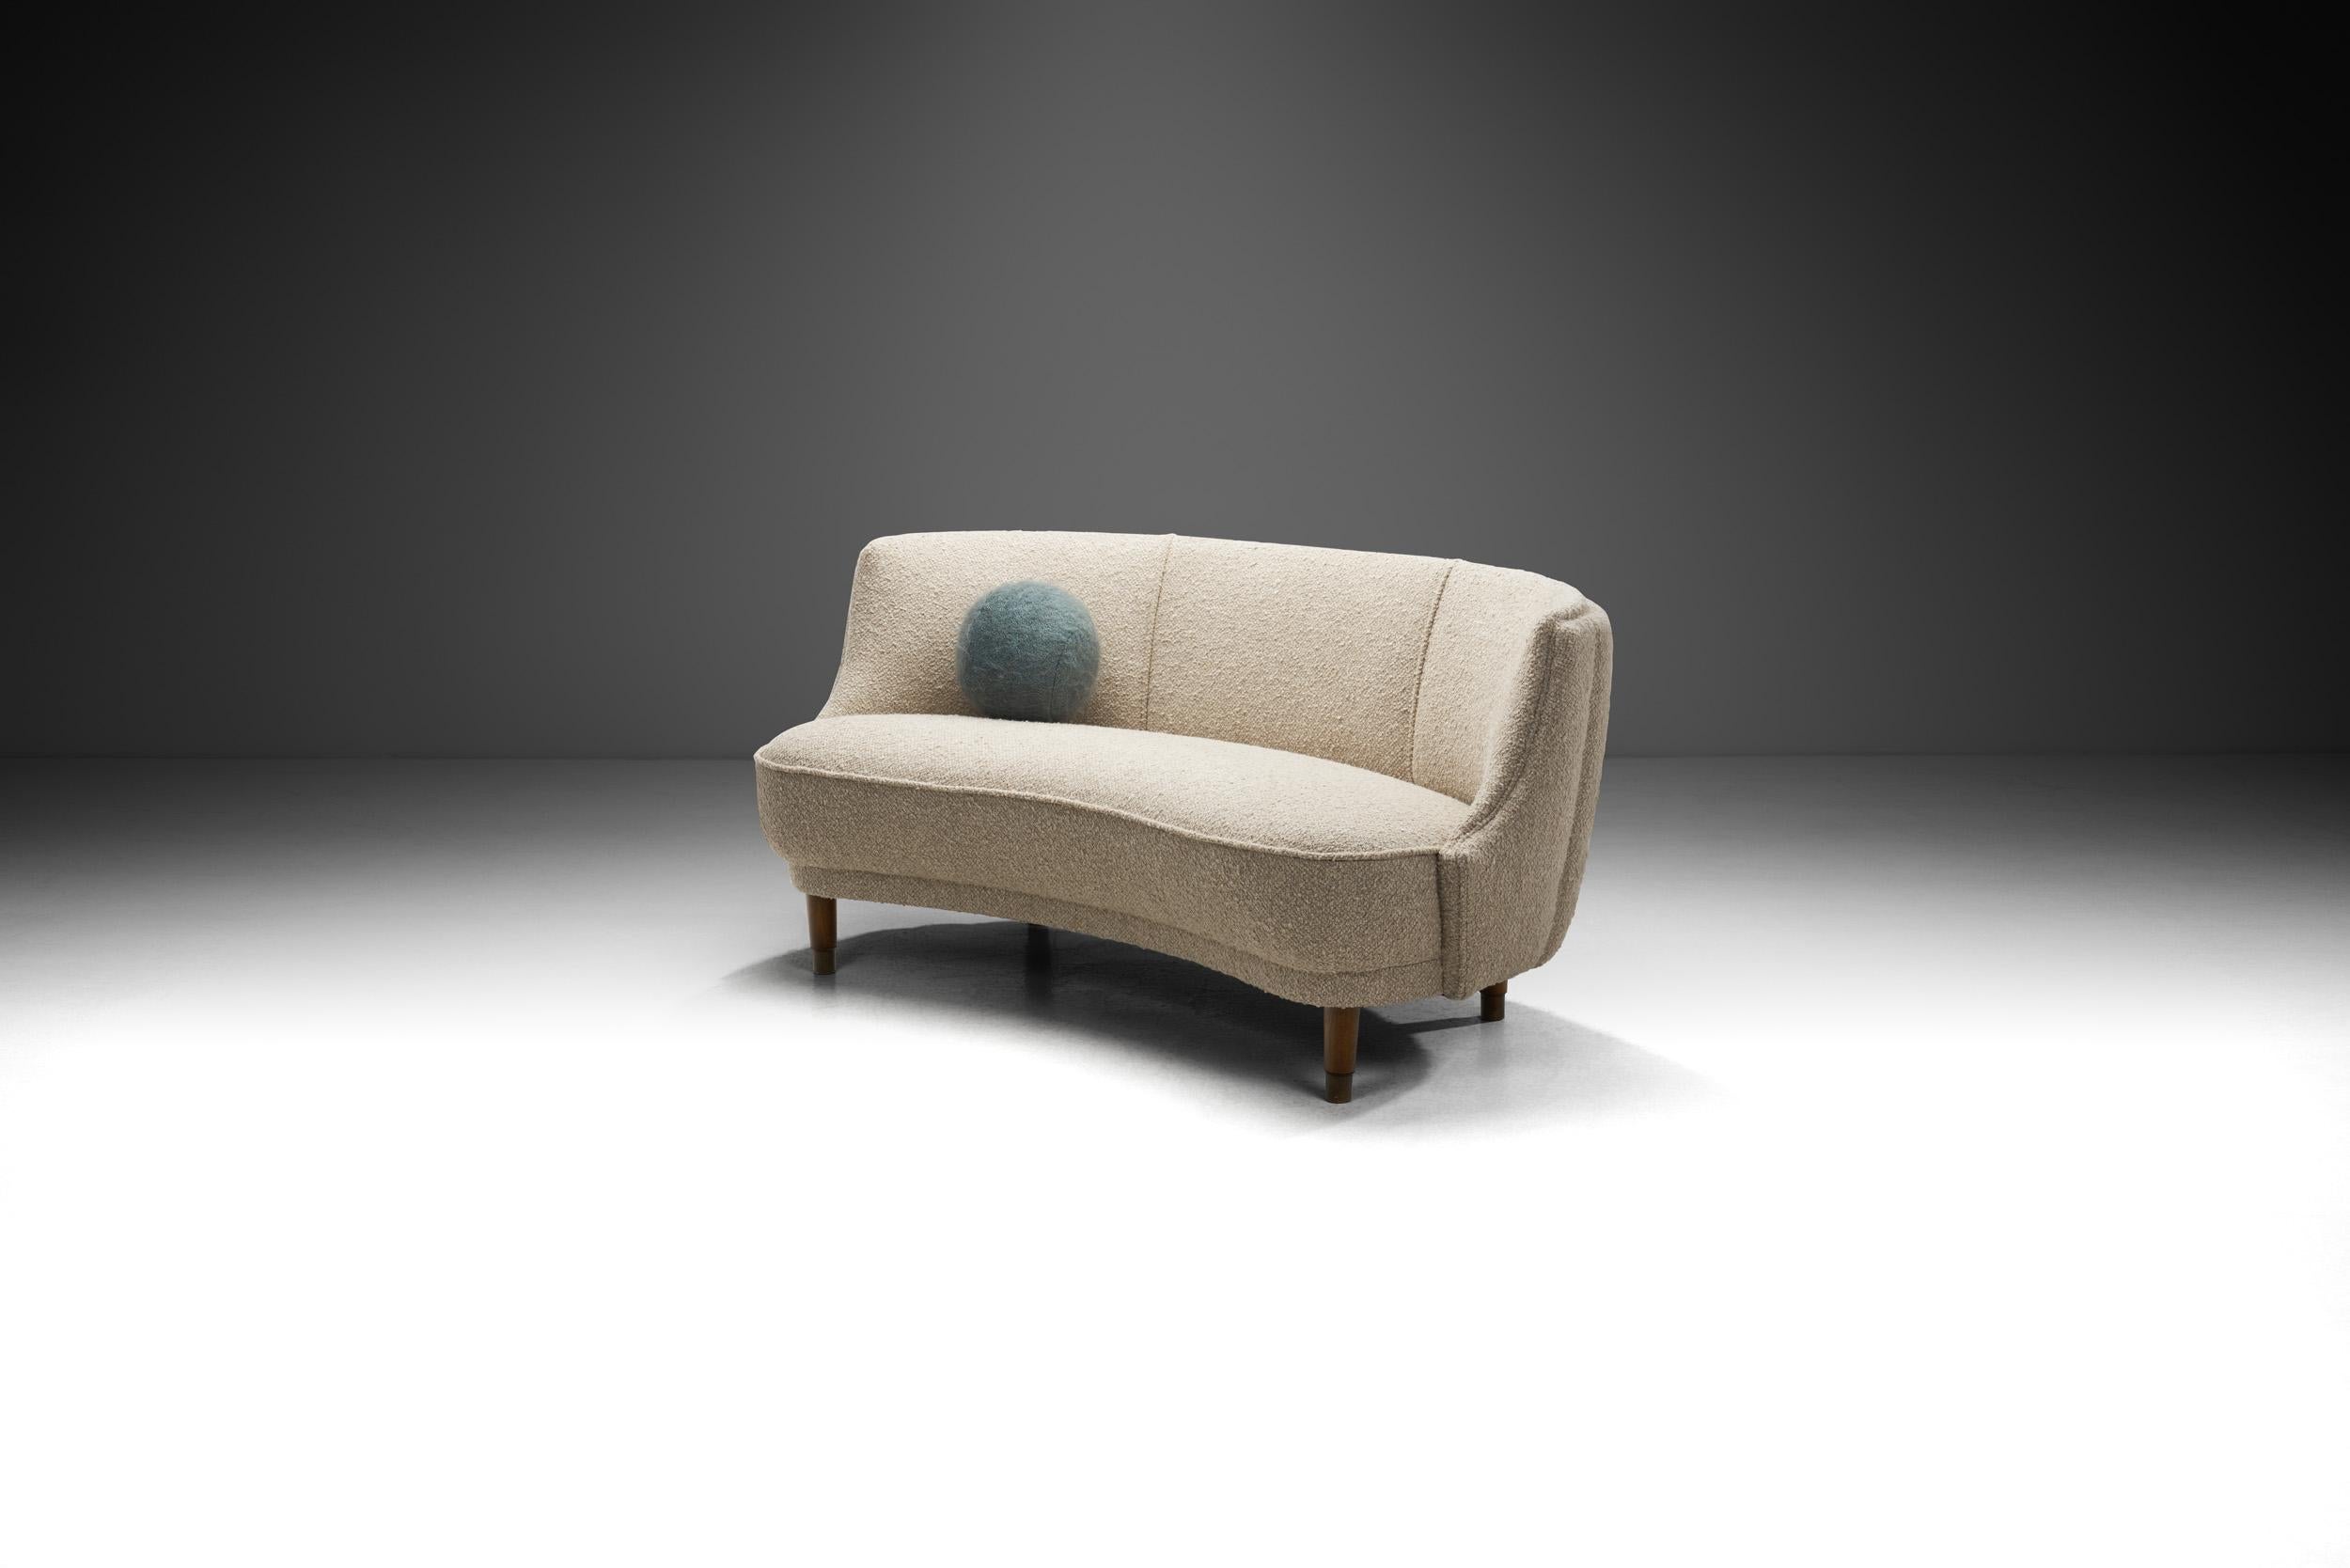 The influence of the Art Deco movement was significant on early Scandinavian modernism, resulting in a unique aesthetic mixture based on traditional craftsmanship and quality. In this beautiful and distinctive sofa, simple horizontal and vertical